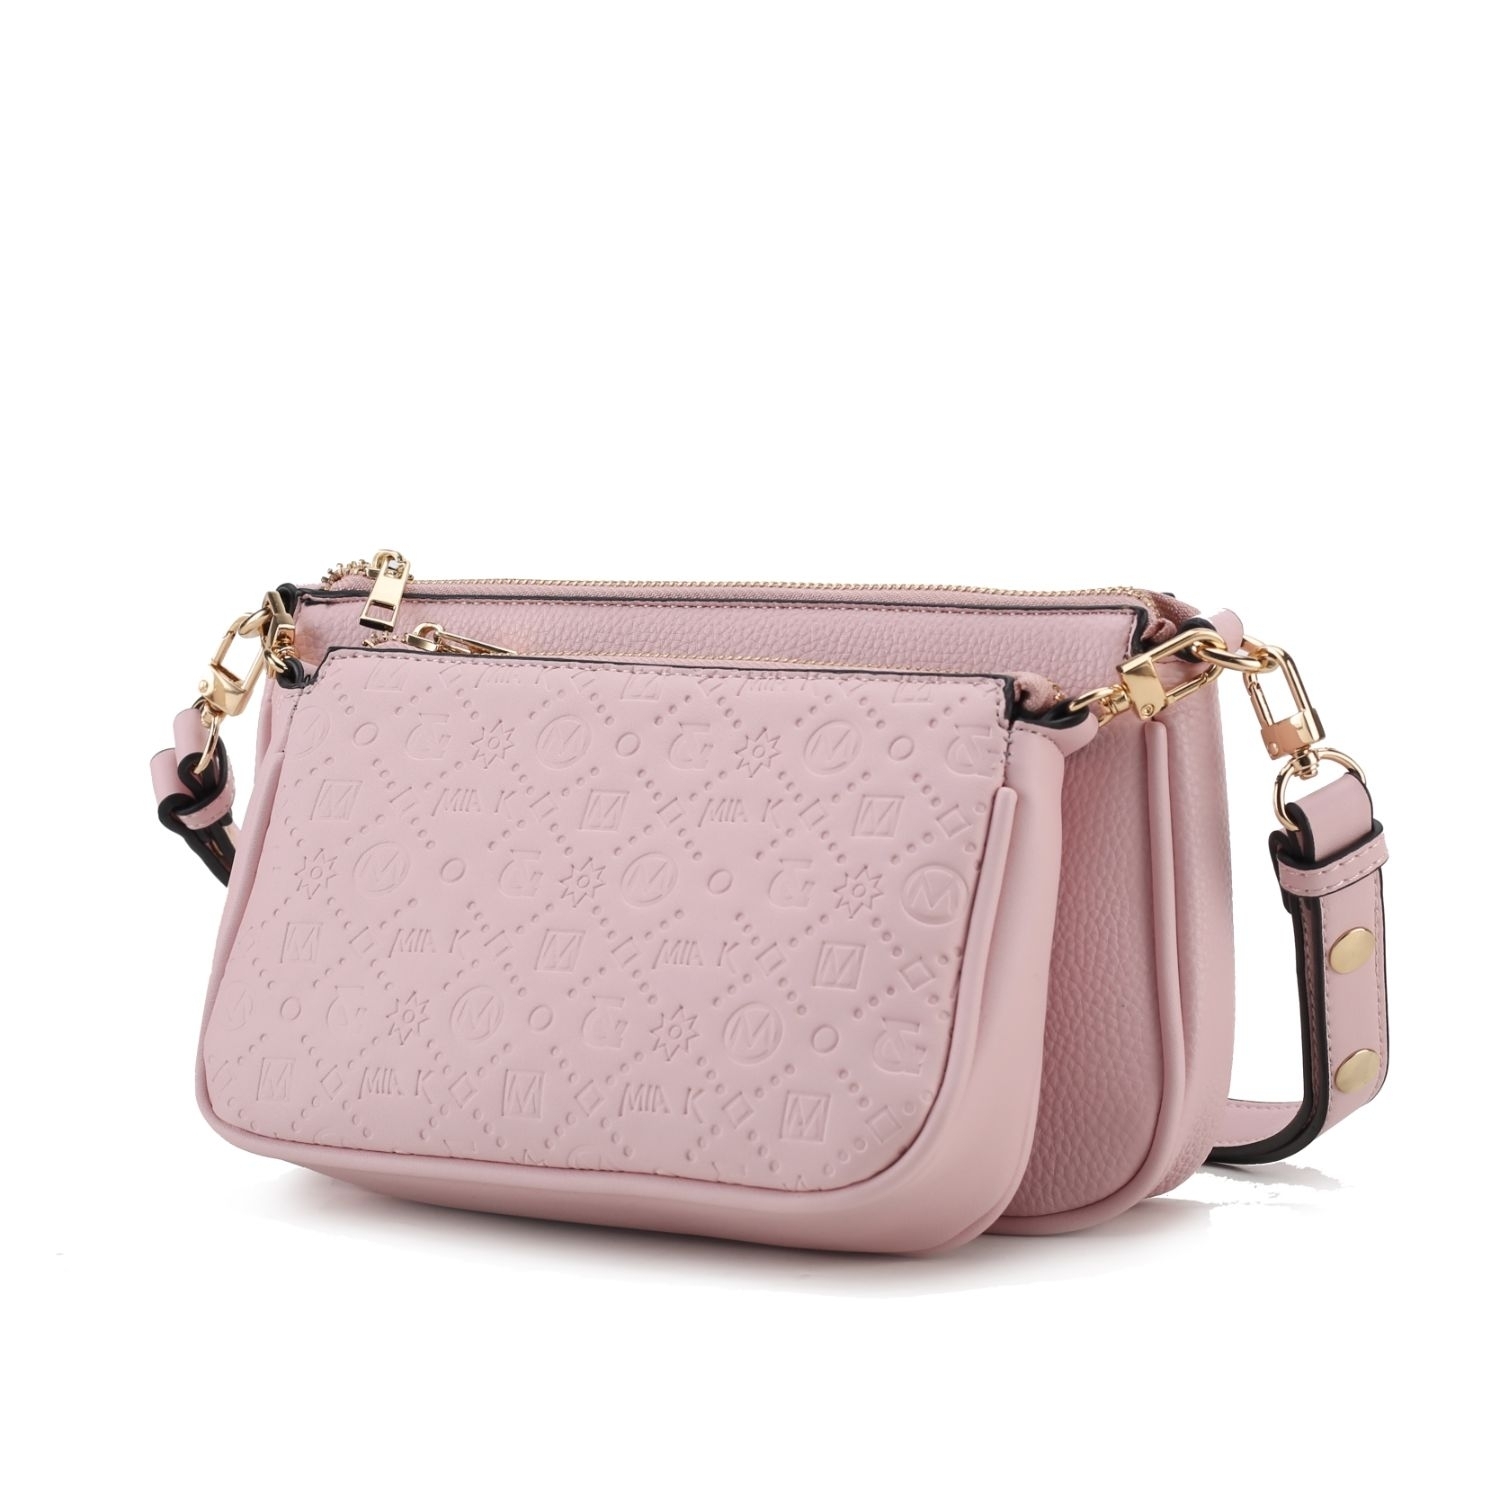 MKF Collection Dayla Vegan Leather Women's Shoulder Bag By Mia K -2 Pieces - Pink